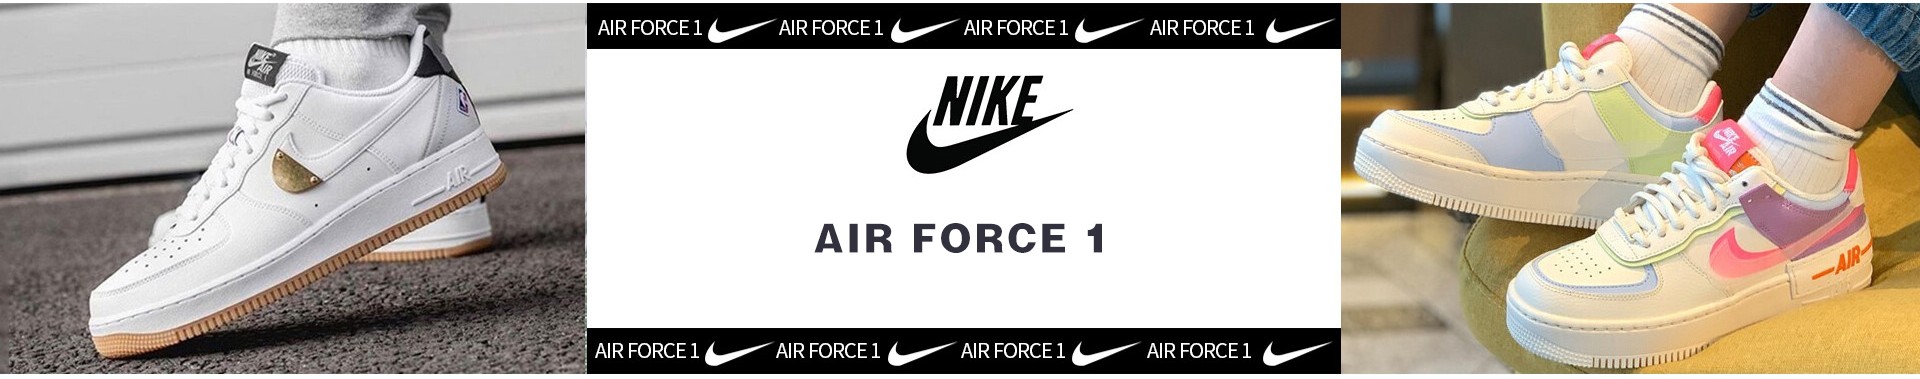 Air Force 1,Air Force 1 Low,Air Force 1 Shadow